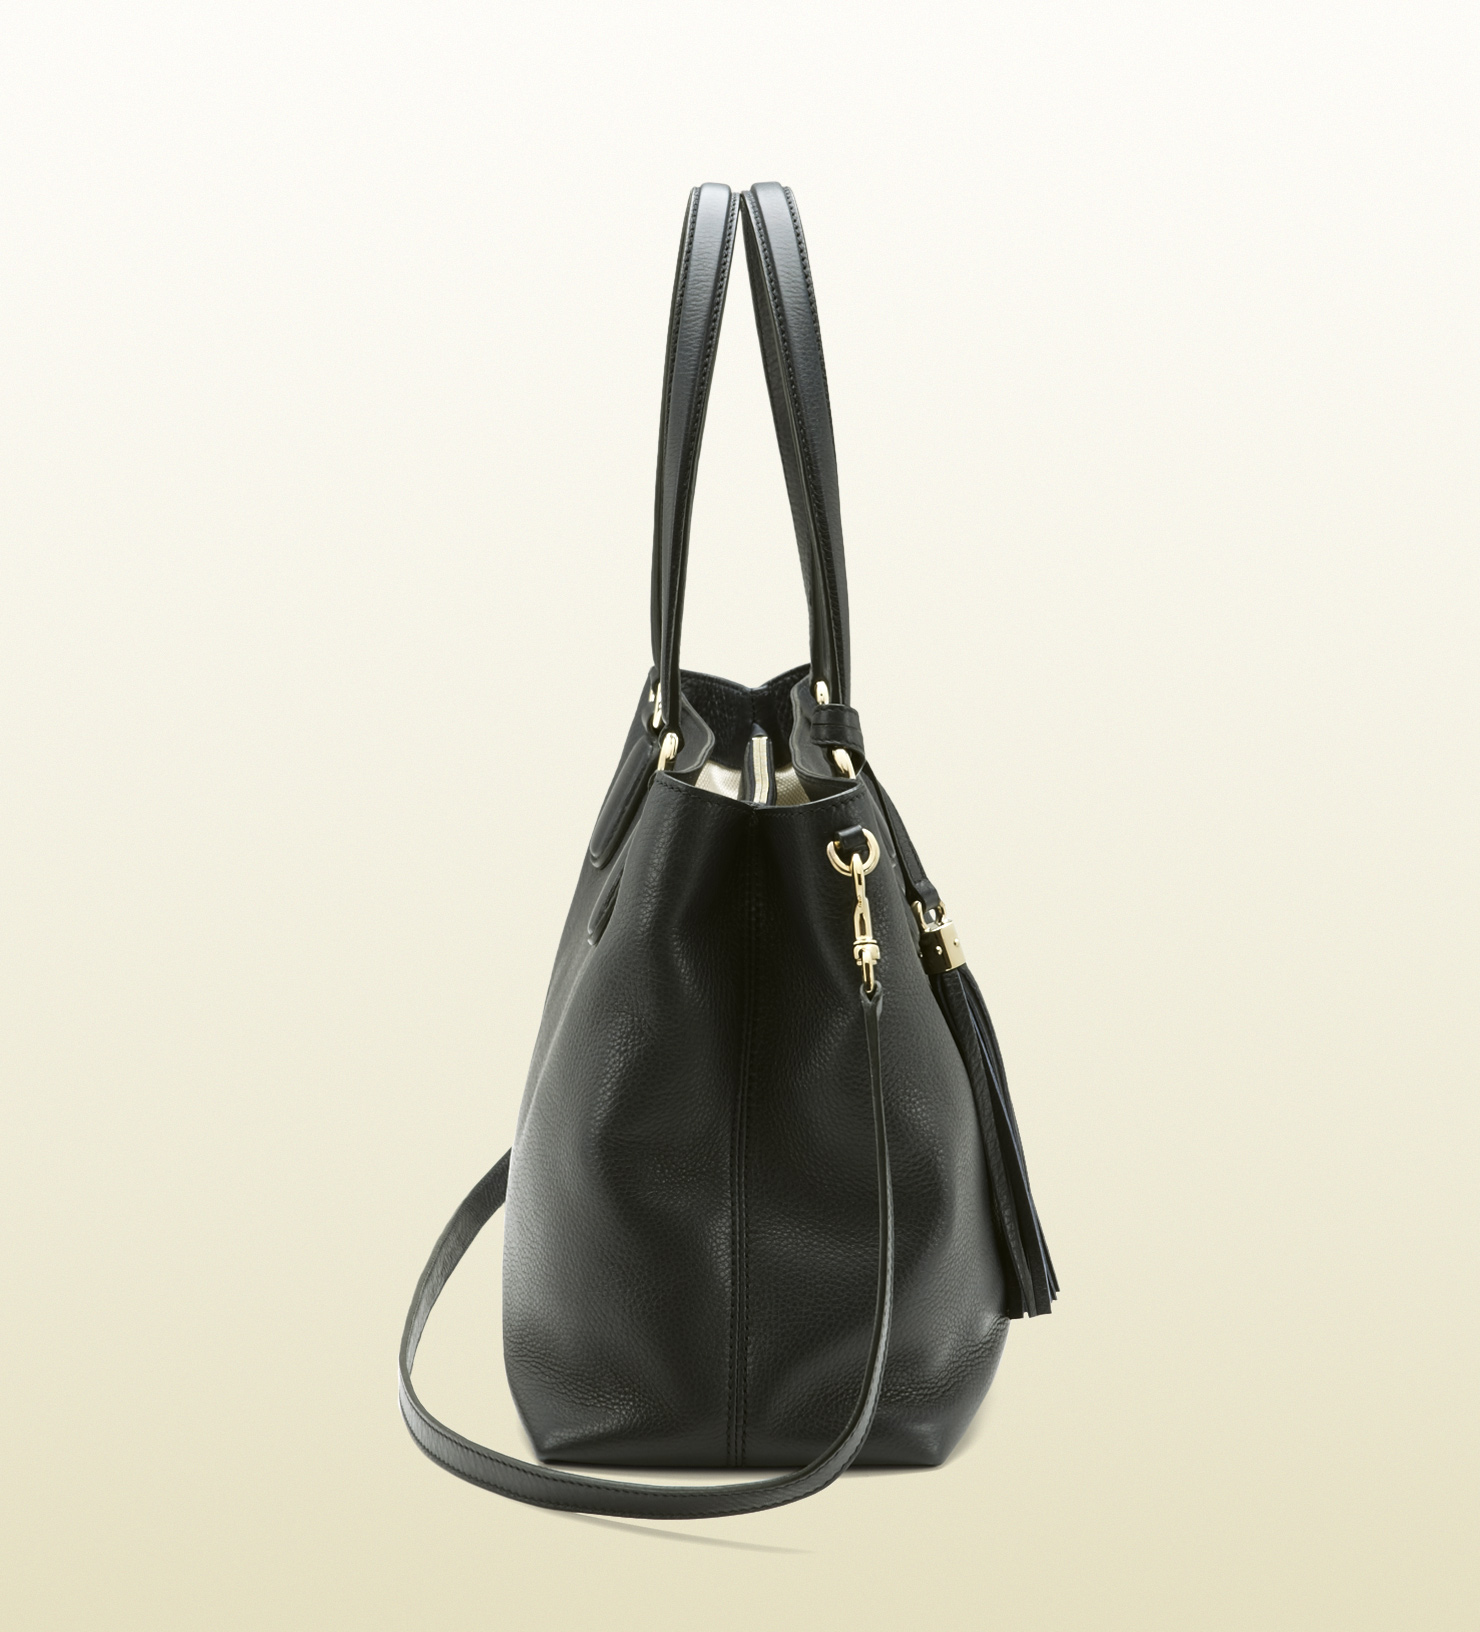 Gucci Soho Black Leather Working Tote - Lyst